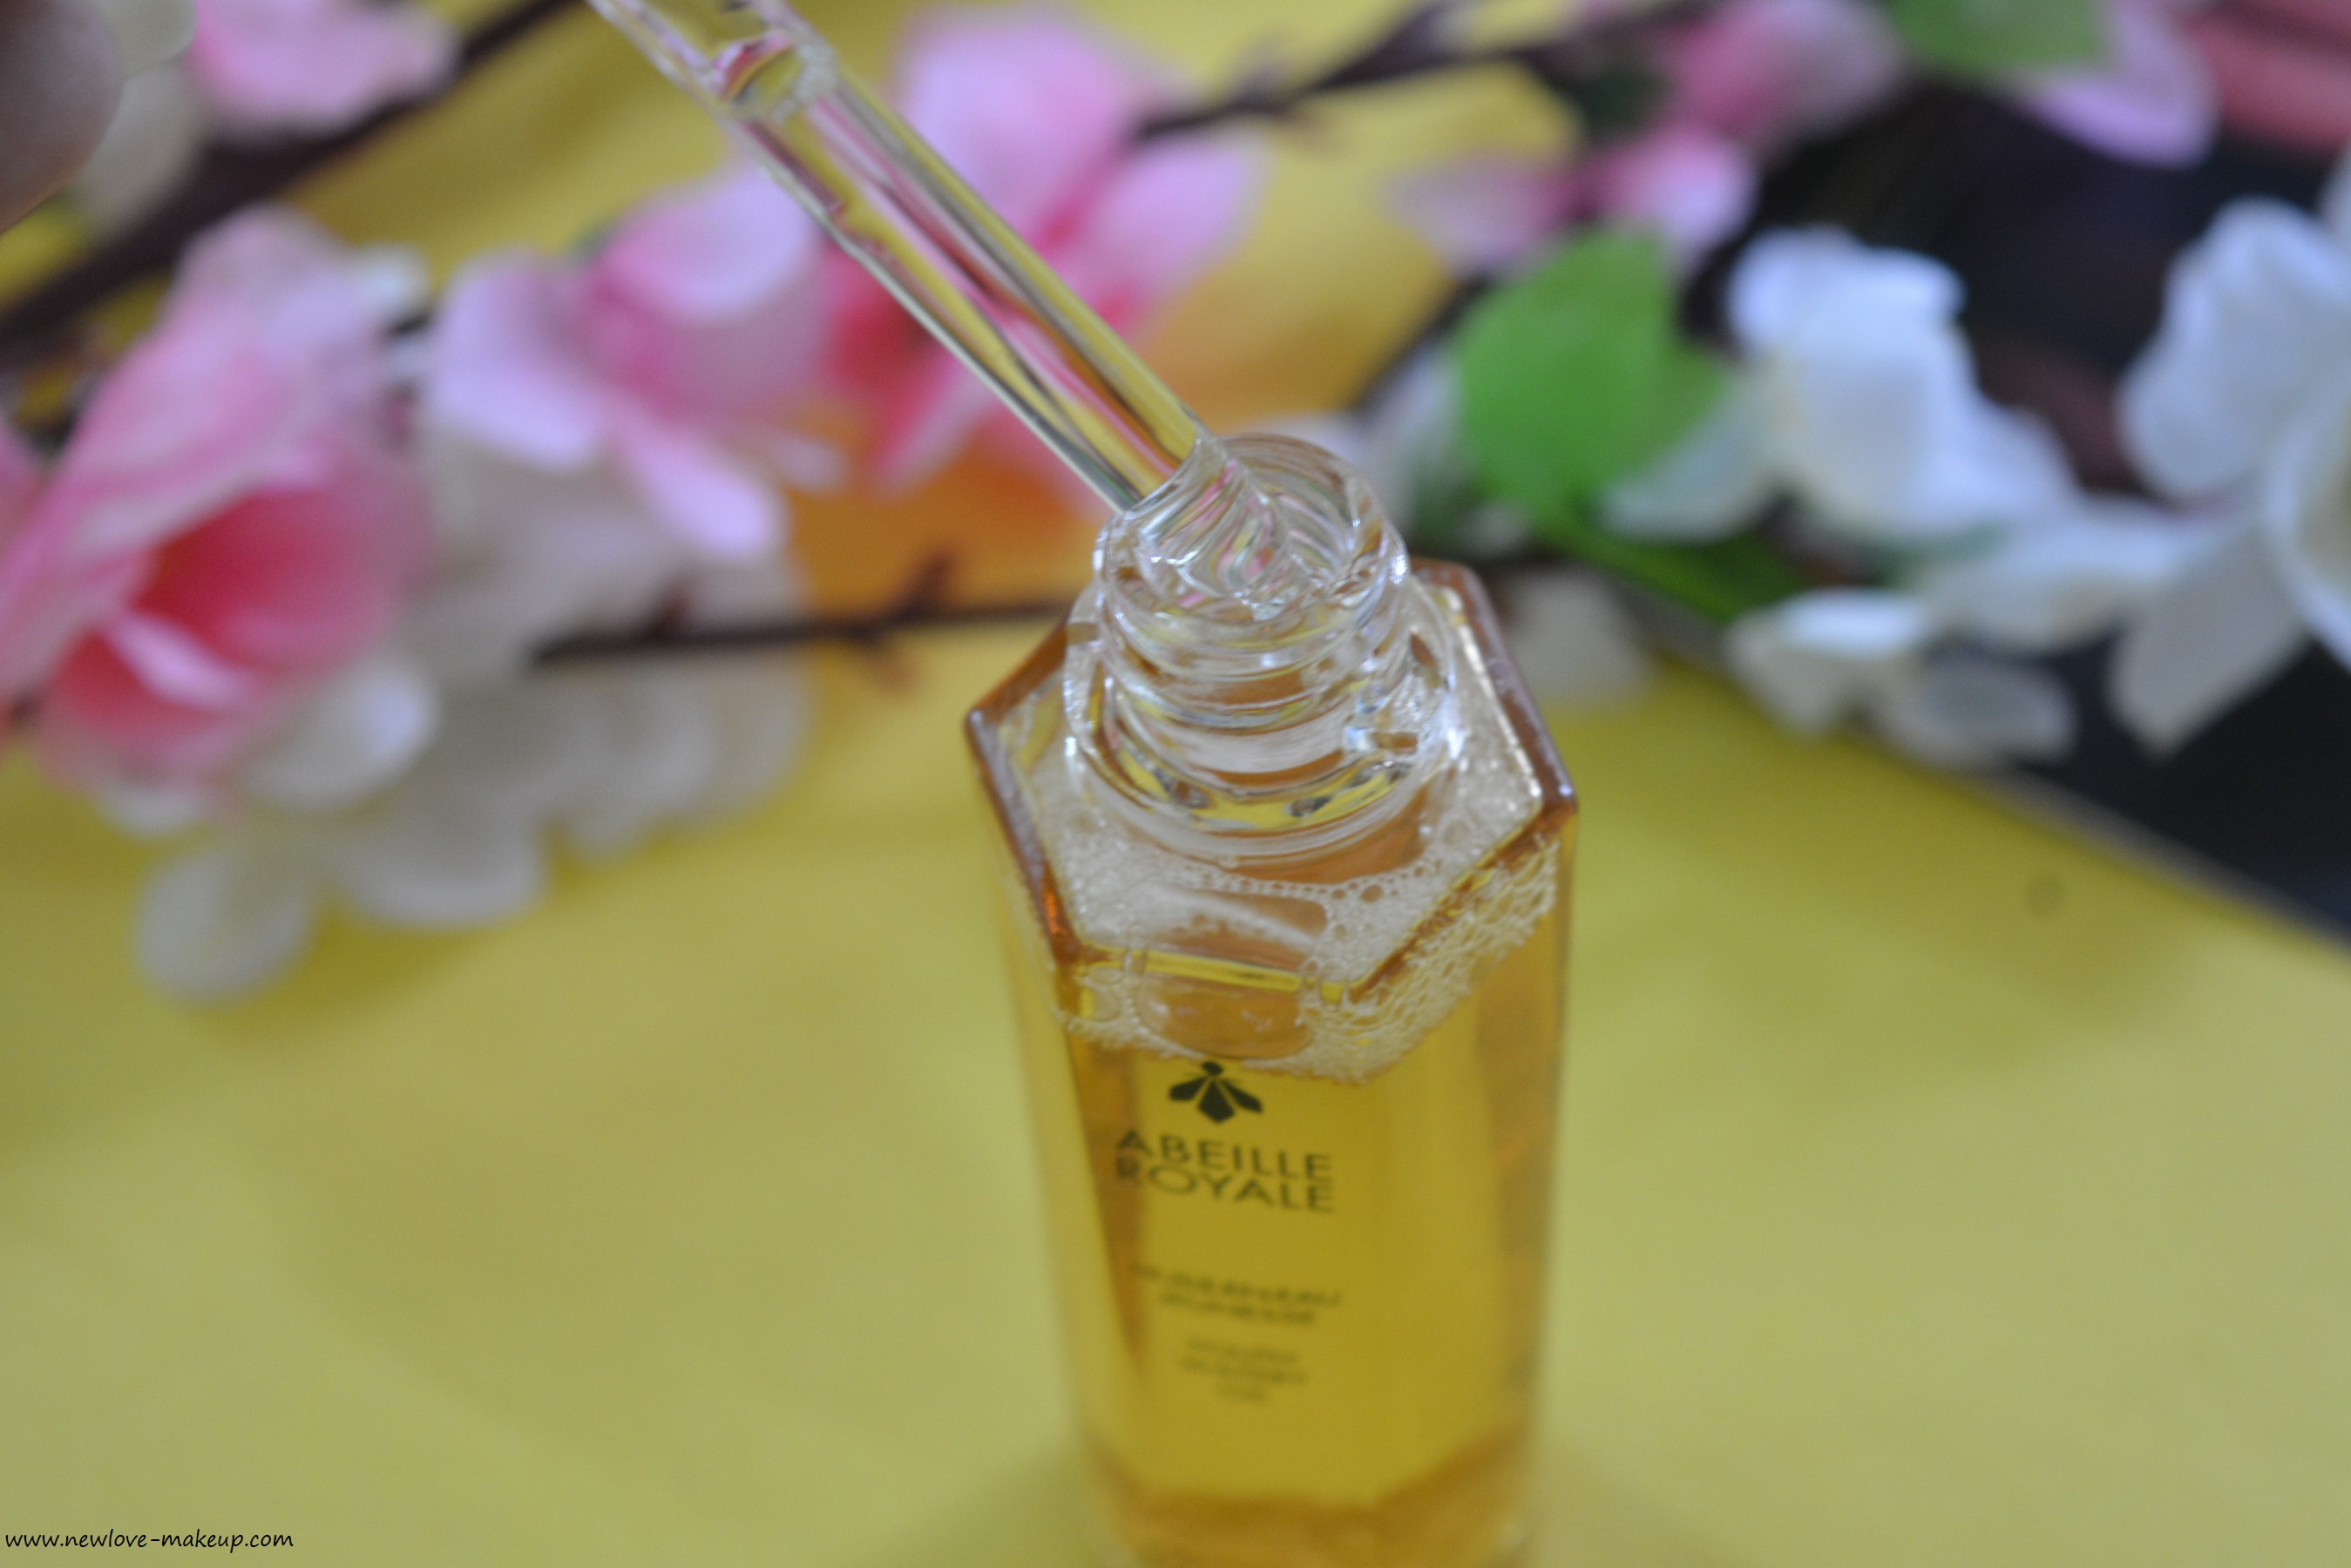 Guerlain Abeille Royale Youth Watery Oil, Kiss Kiss Matte Lipstick Review